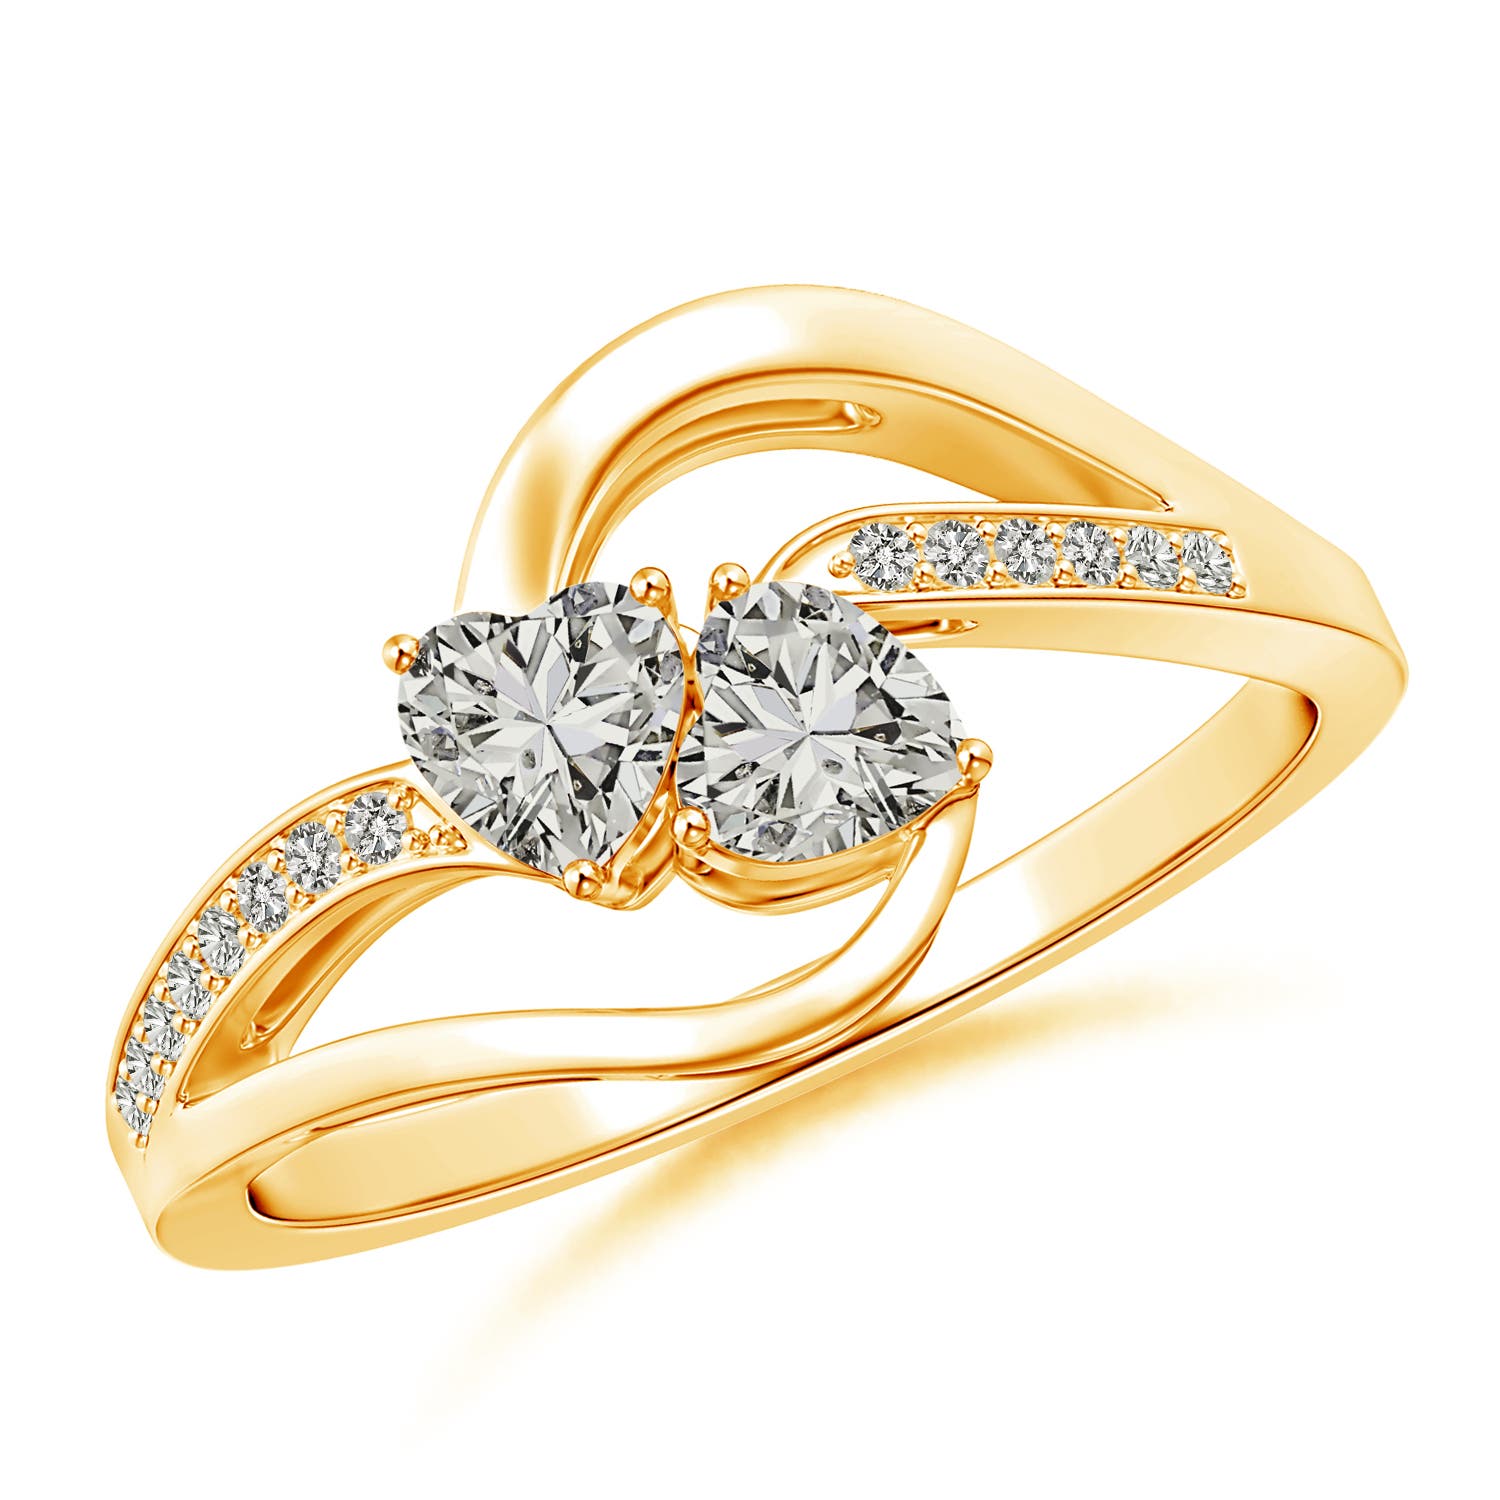 K, I3 / 0.45 CT / 14 KT Yellow Gold